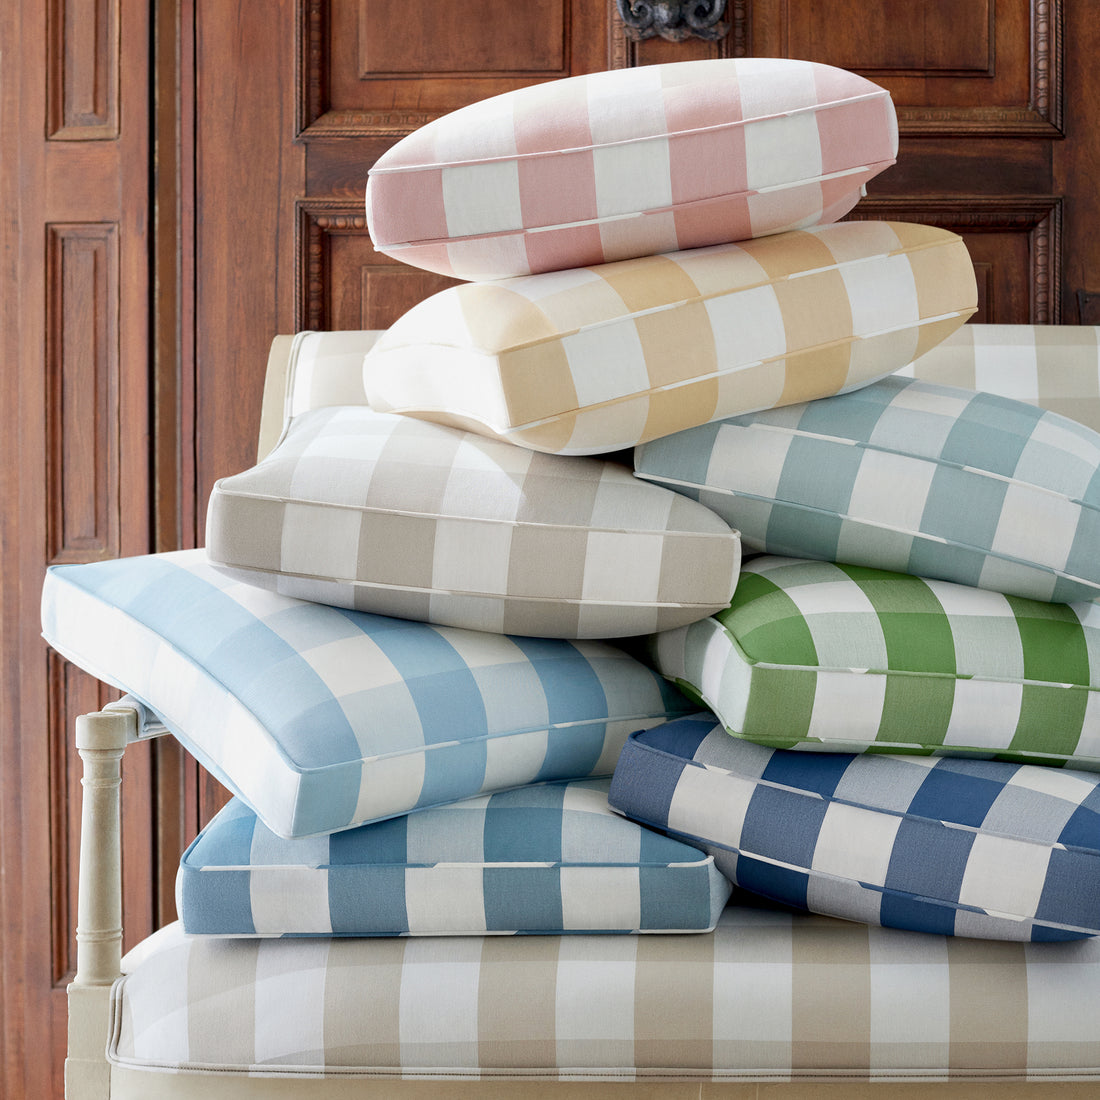 Pillows in Hammond Check woven fabric - pattern number AW24502 - by Anna French in the Devon collection